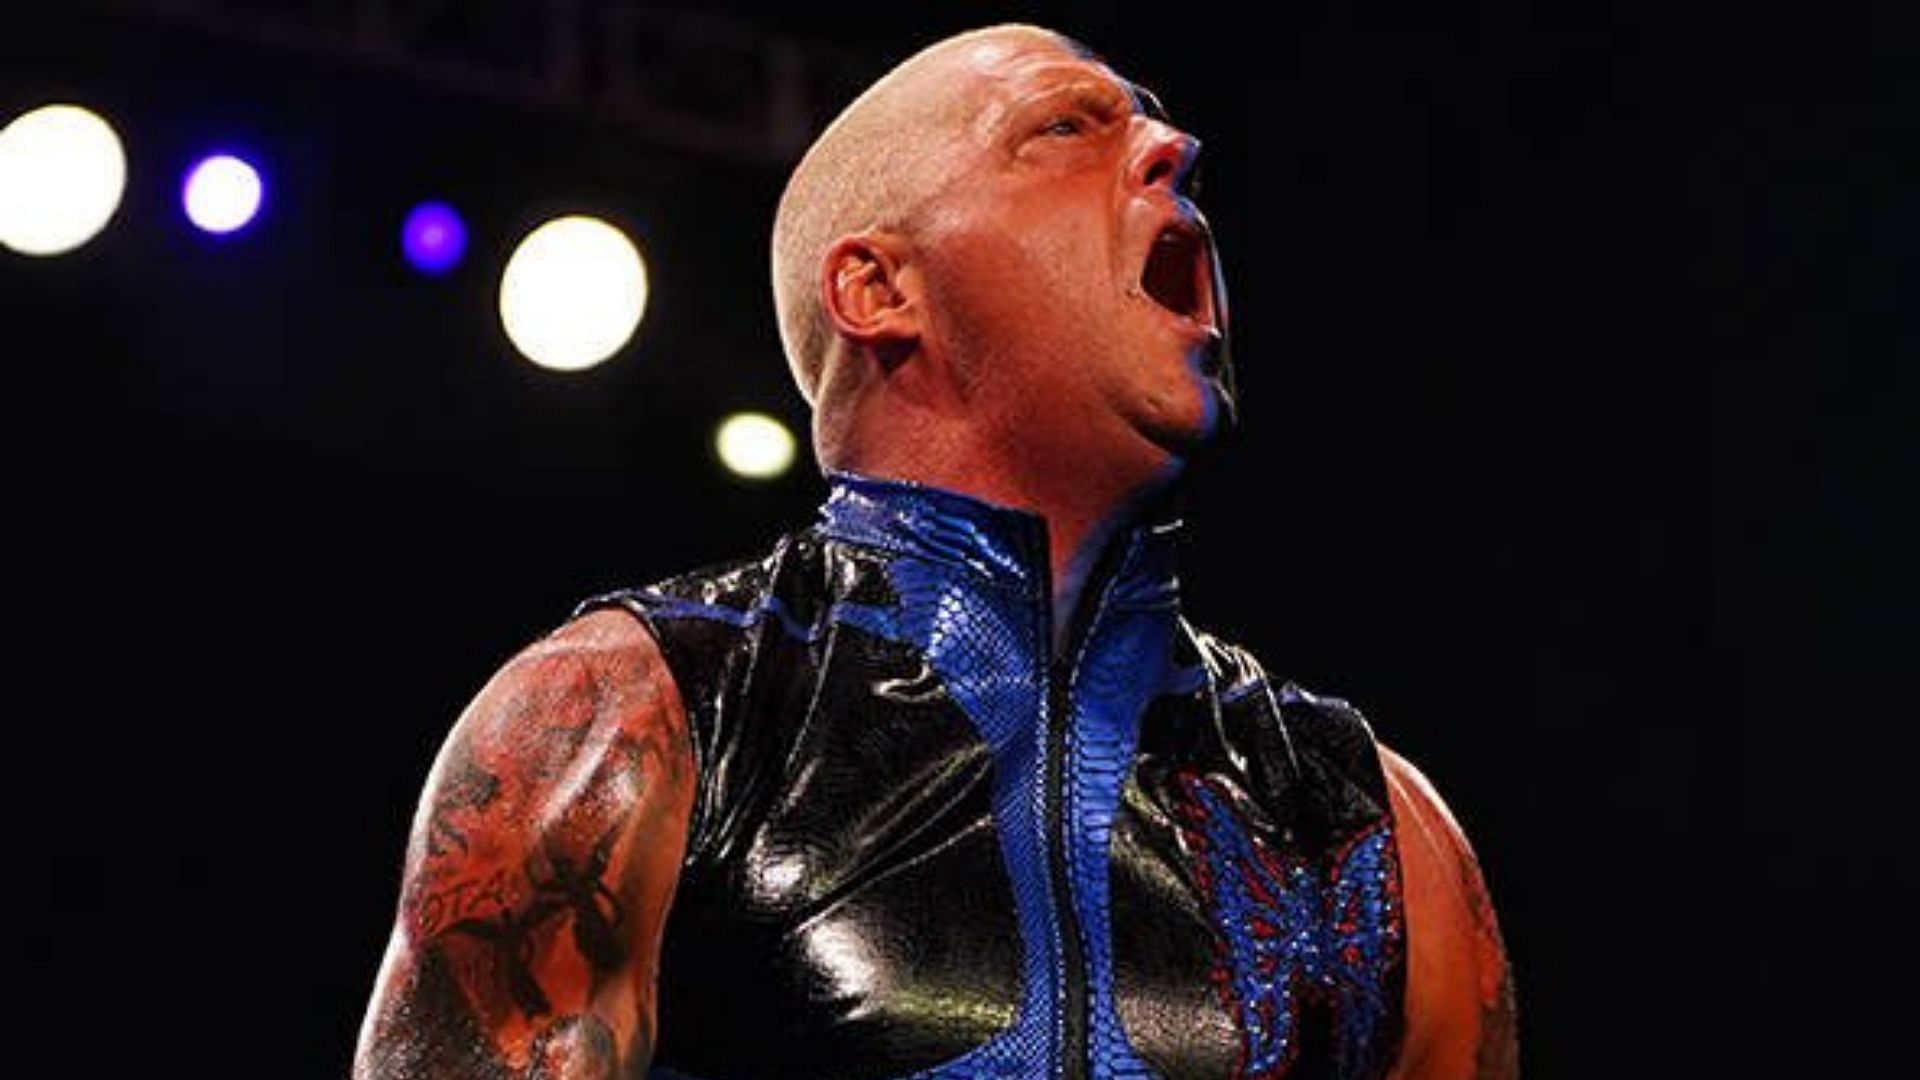 Dustin Rhodes at an AEW event in 2021